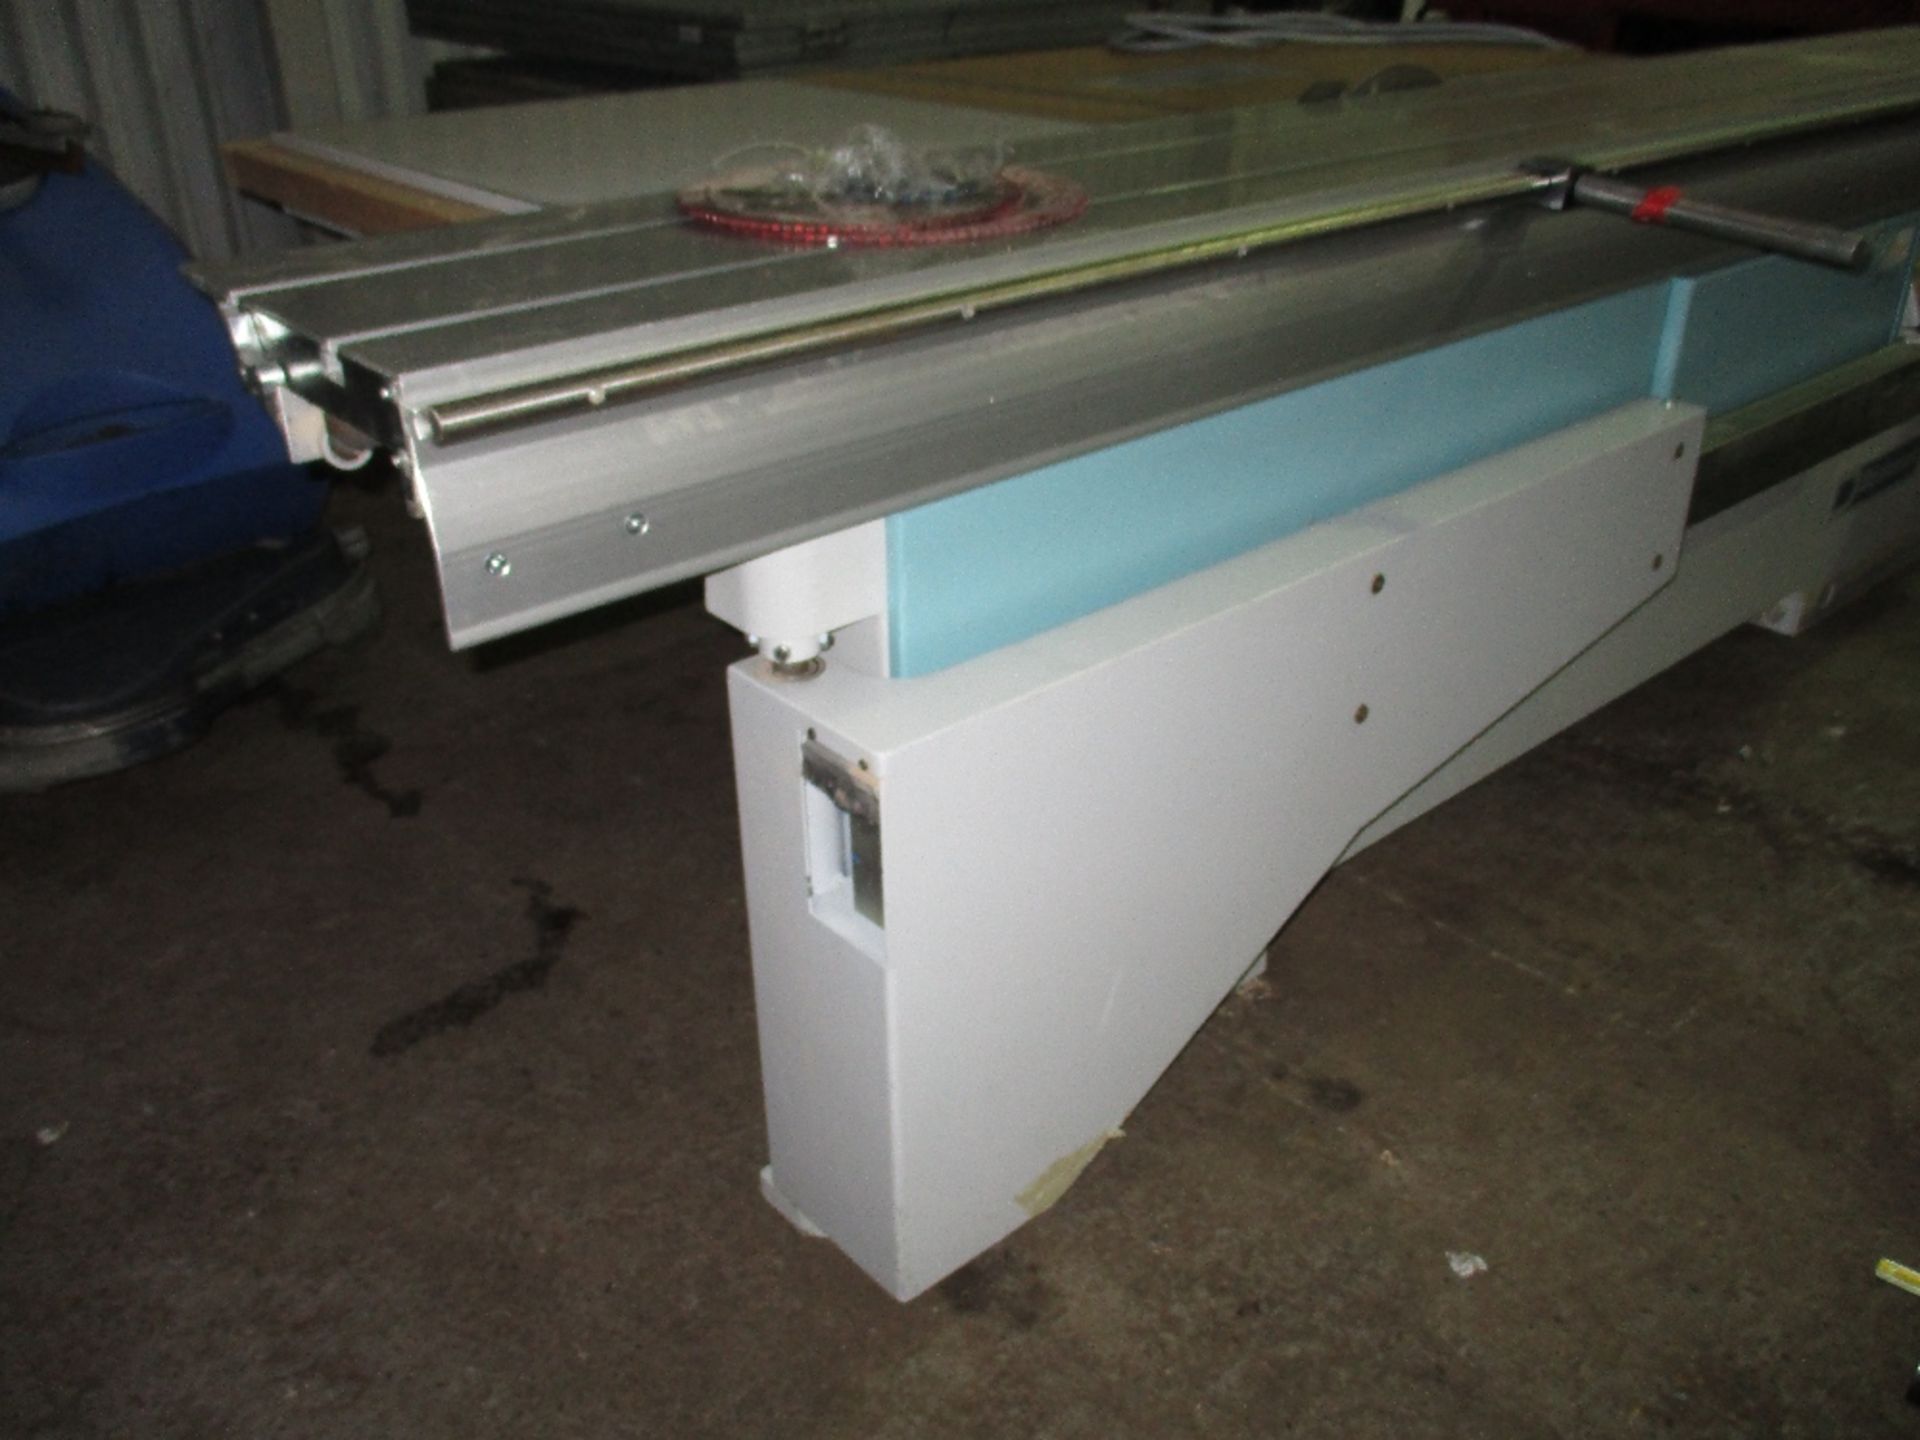 Socomec Diplomat sliding bed table saw with extensions and guides - Image 8 of 12